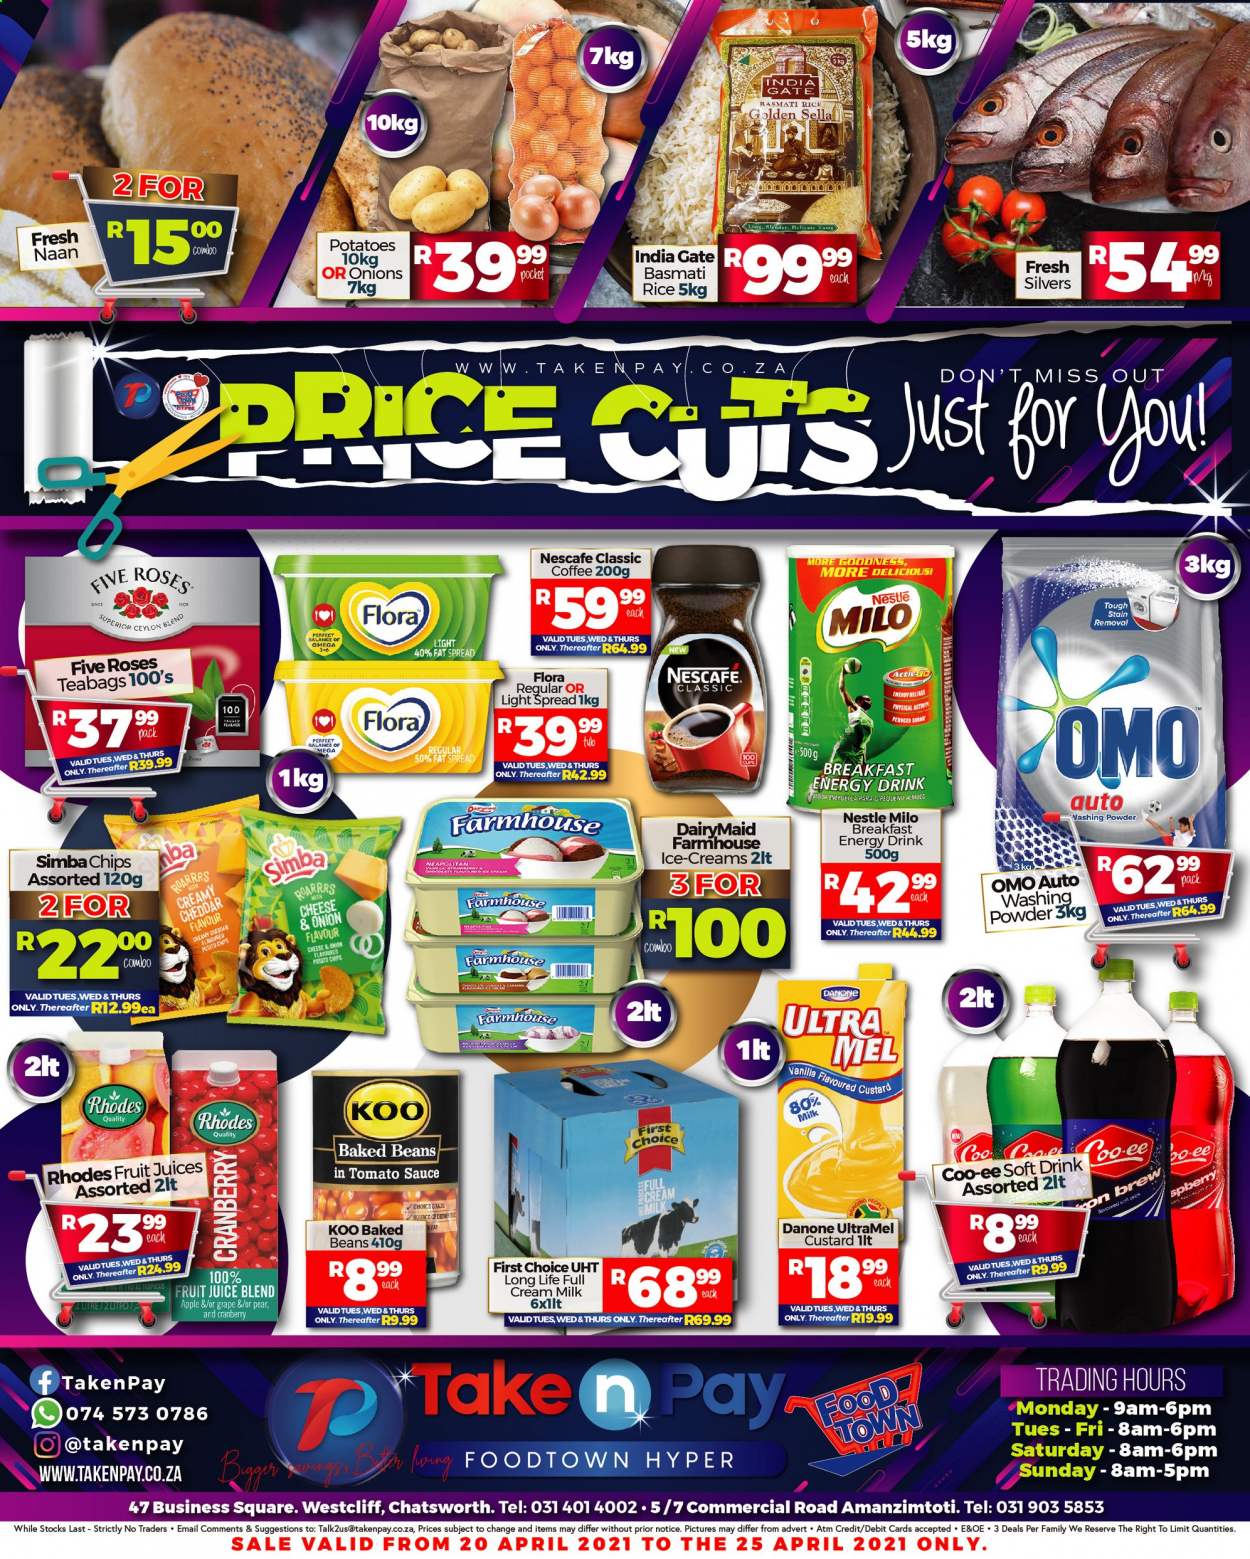 Take n Pay specials - 04.20.2021 - 04.25.2021. 